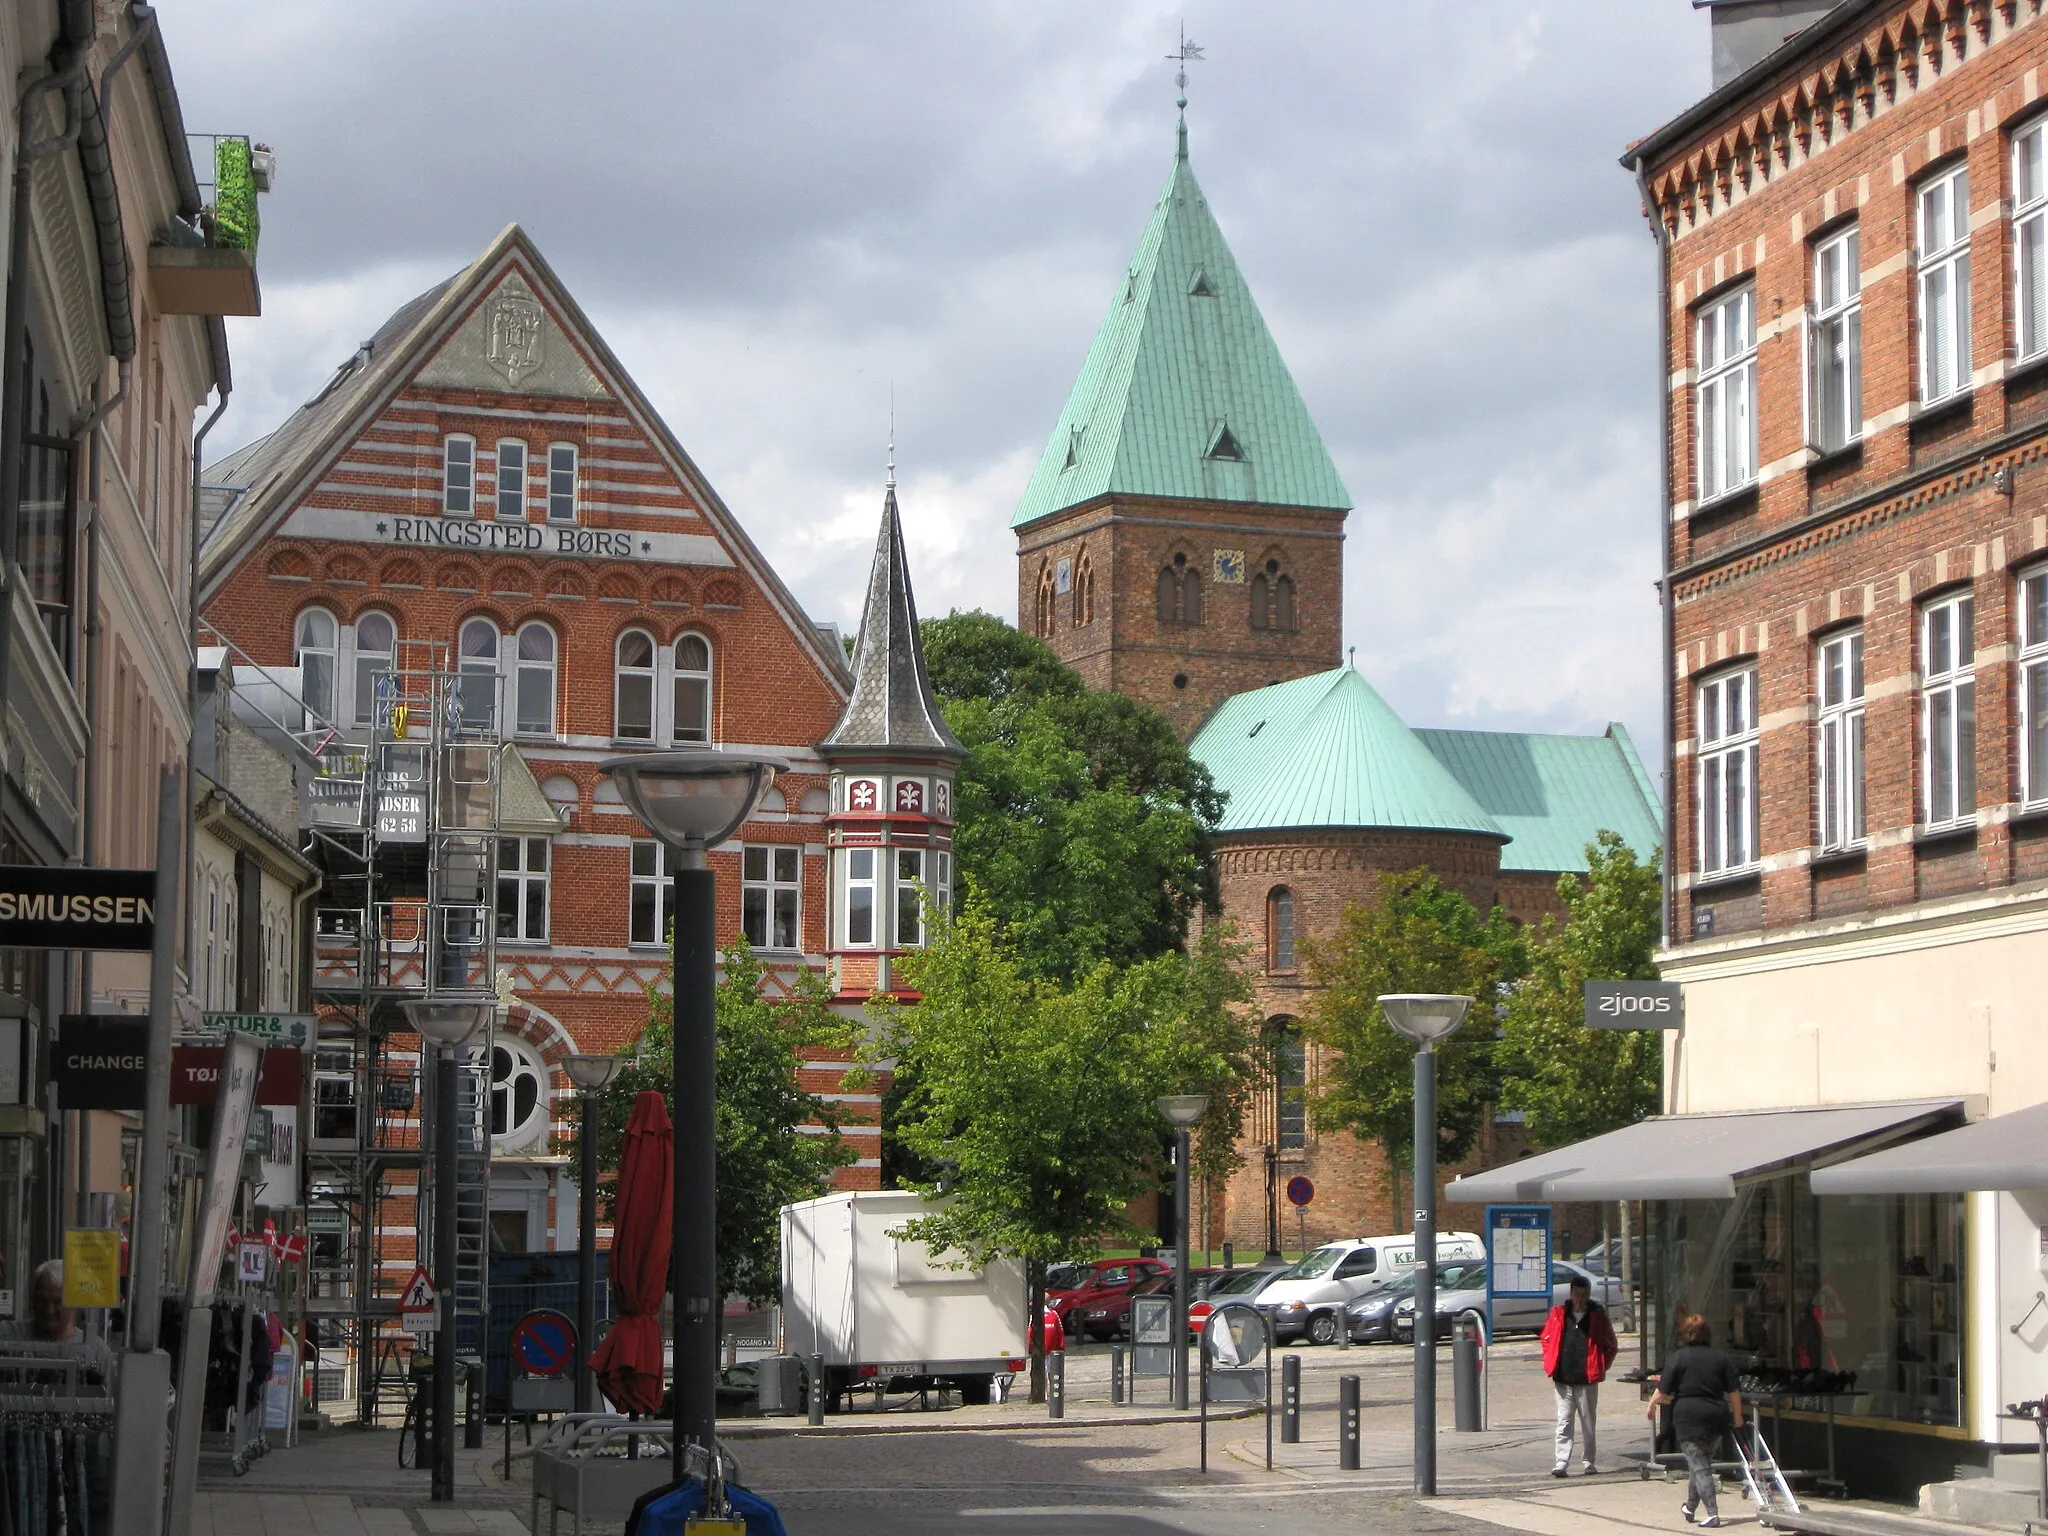 Photo showing: The street "Sct. Hans Gade" in the town "Ringsted", and the church "Sankt Bendts Kirke" seen in the background. The town is located on Mid Zealand in east Denmark.